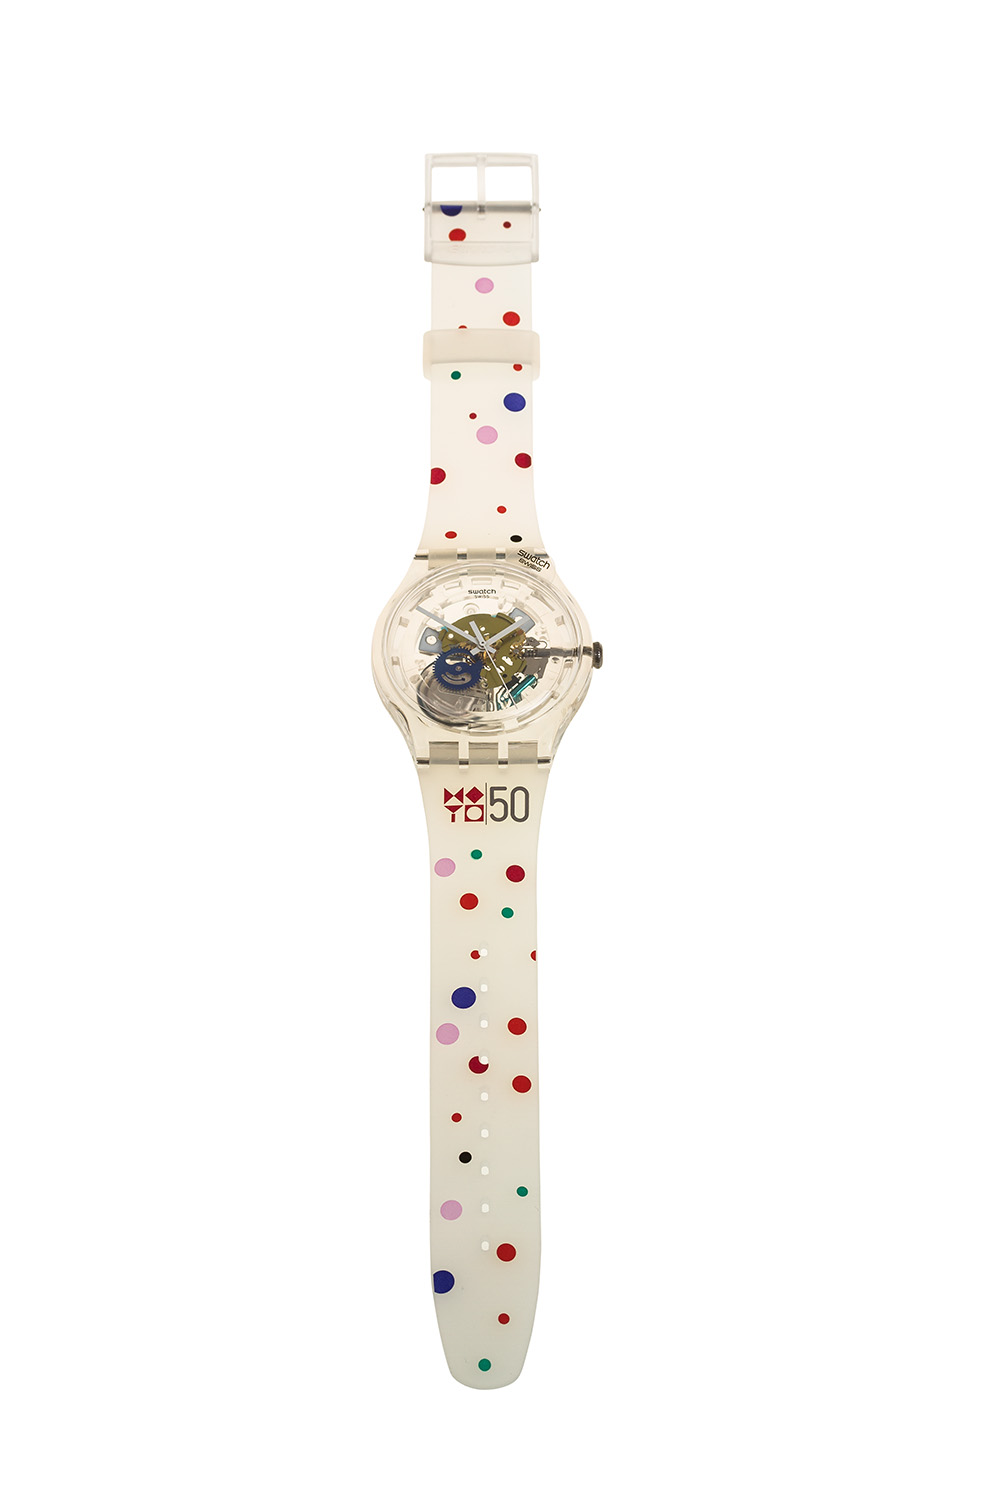 Israel Museum Swatch – Limited Edition